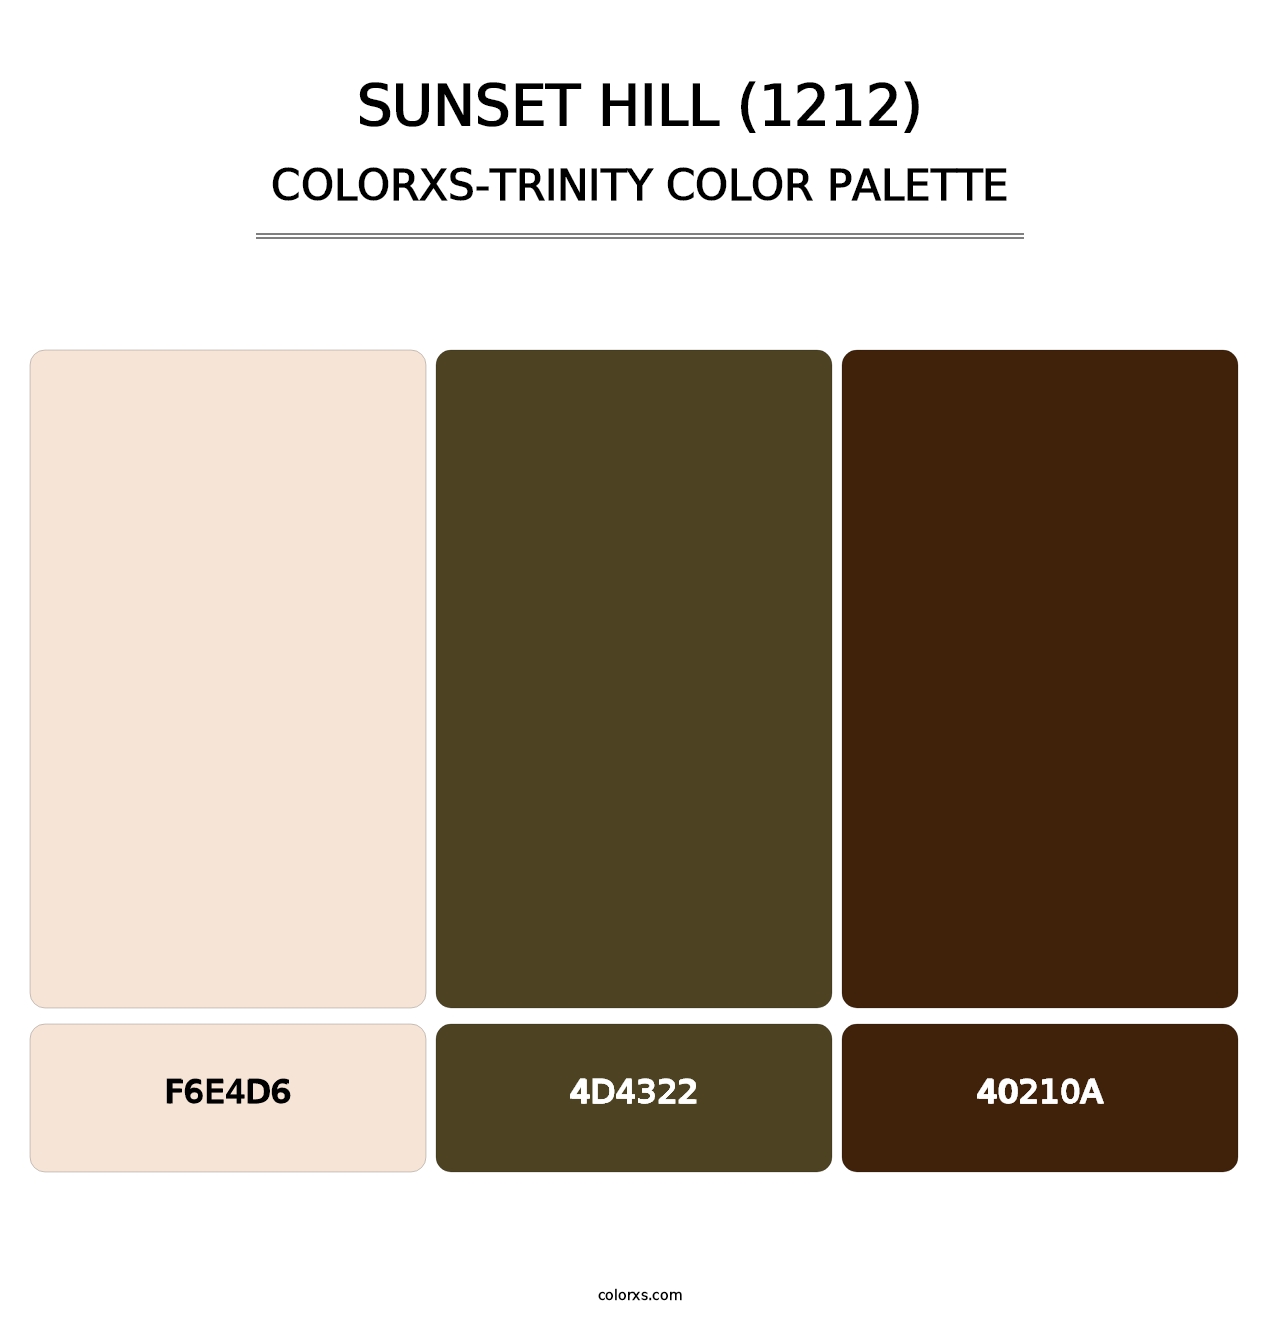 Sunset Hill (1212) - Colorxs Trinity Palette